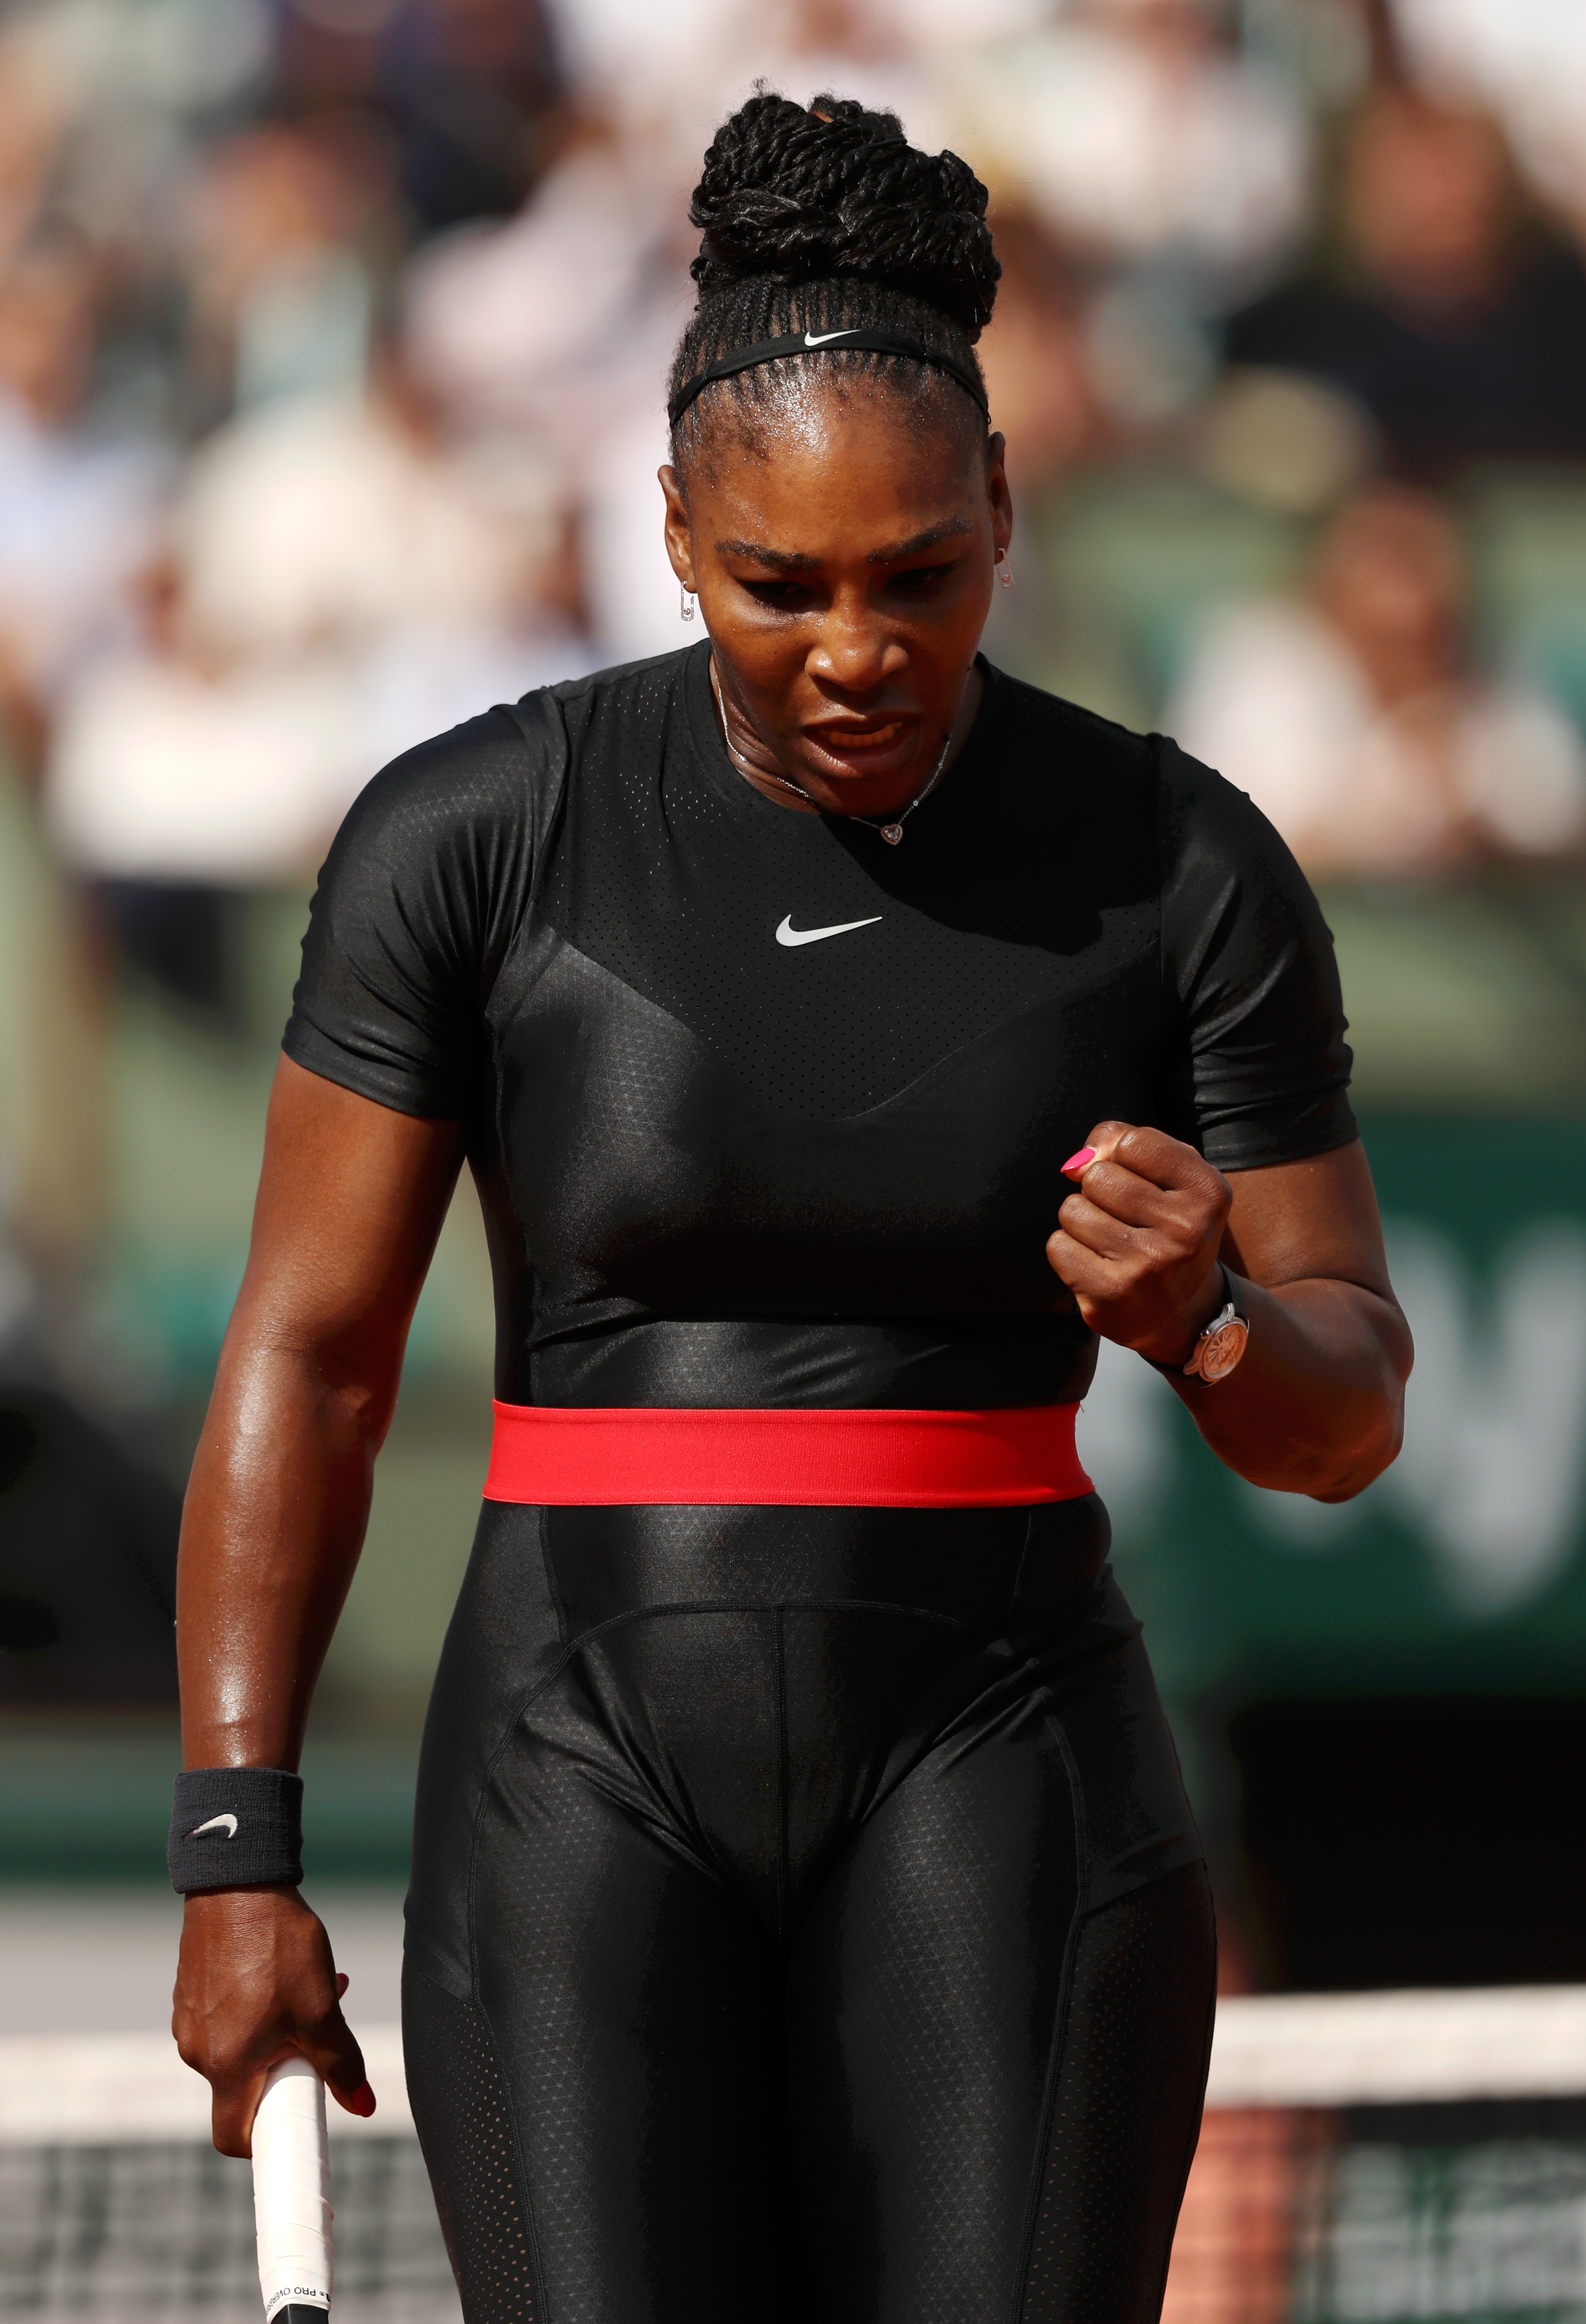 PARIS, FRANCE - MAY 29: Serena Williams of The United States competes during her ladies singles first round match against Kristyna Pliskova of Czech Republic during day three of the 2018 French Open at Roland Garros on May 29, 2018 in Paris, France. (Photo by Matthew Stockman/Getty Images)